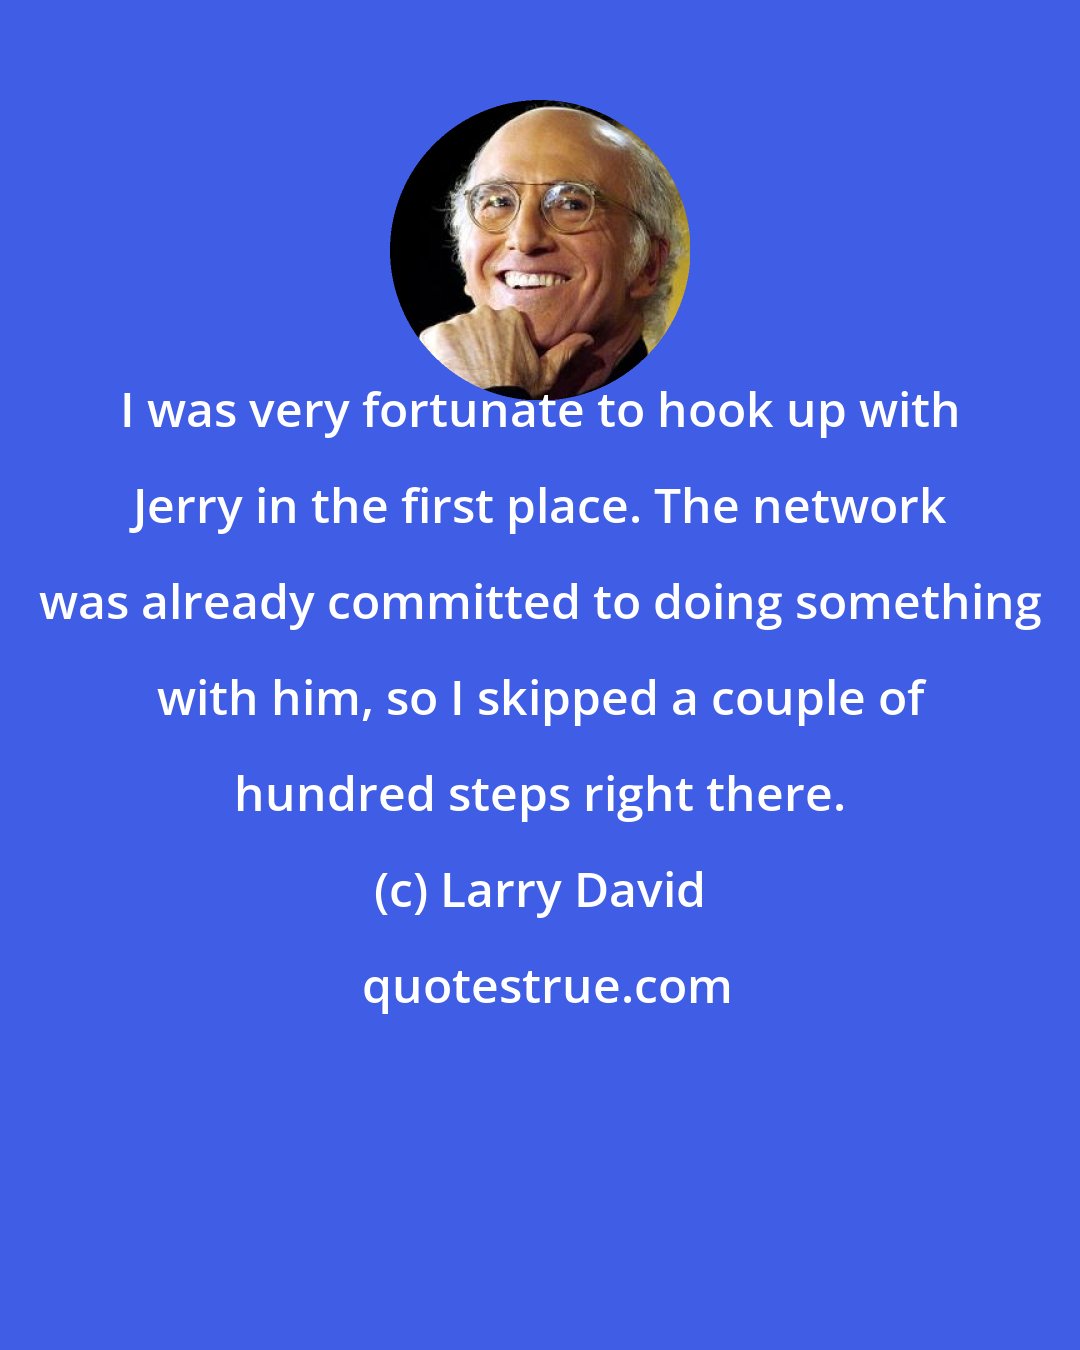 Larry David: I was very fortunate to hook up with Jerry in the first place. The network was already committed to doing something with him, so I skipped a couple of hundred steps right there.